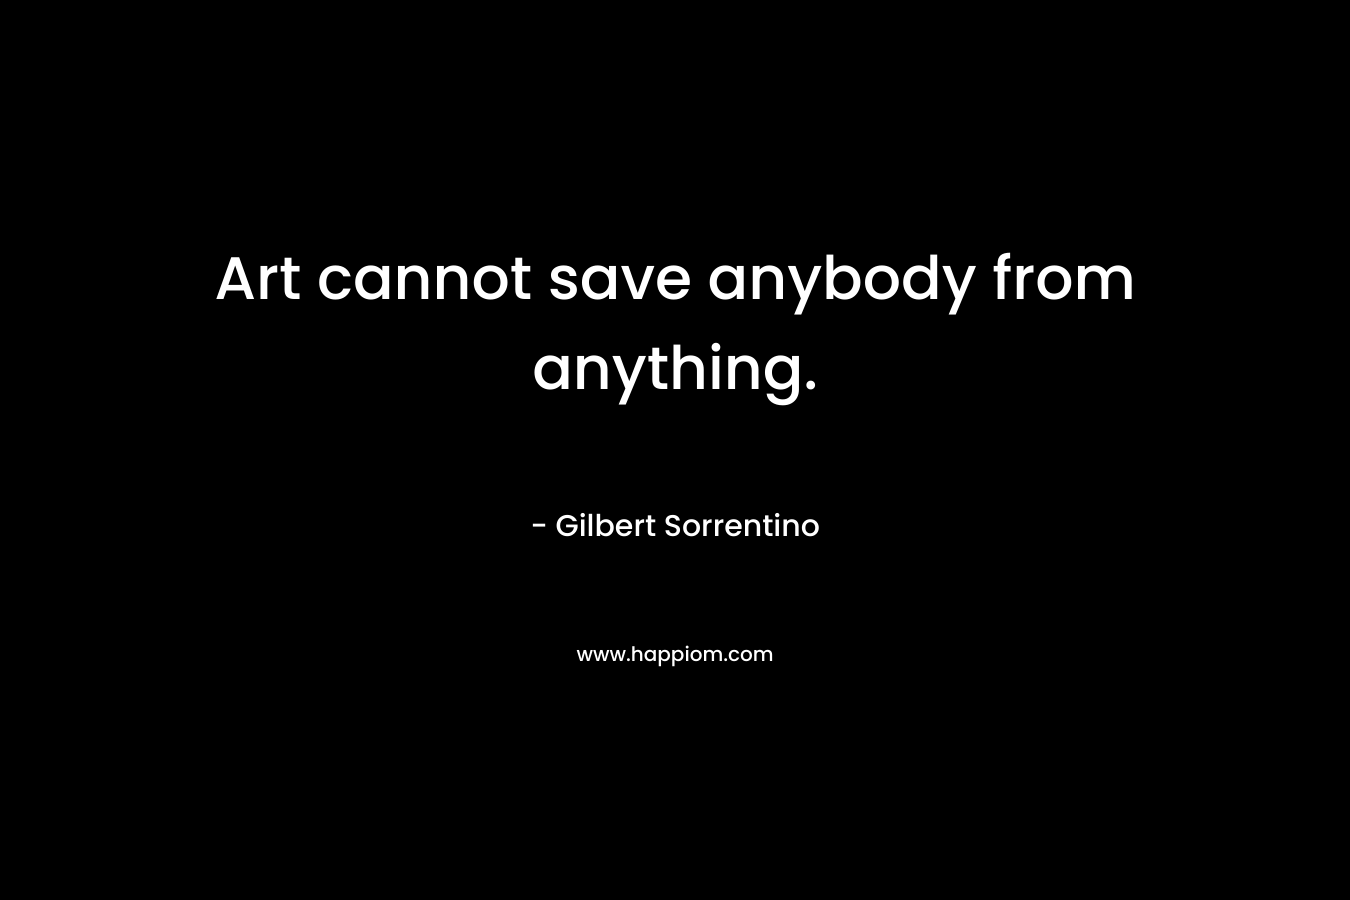 Art cannot save anybody from anything.